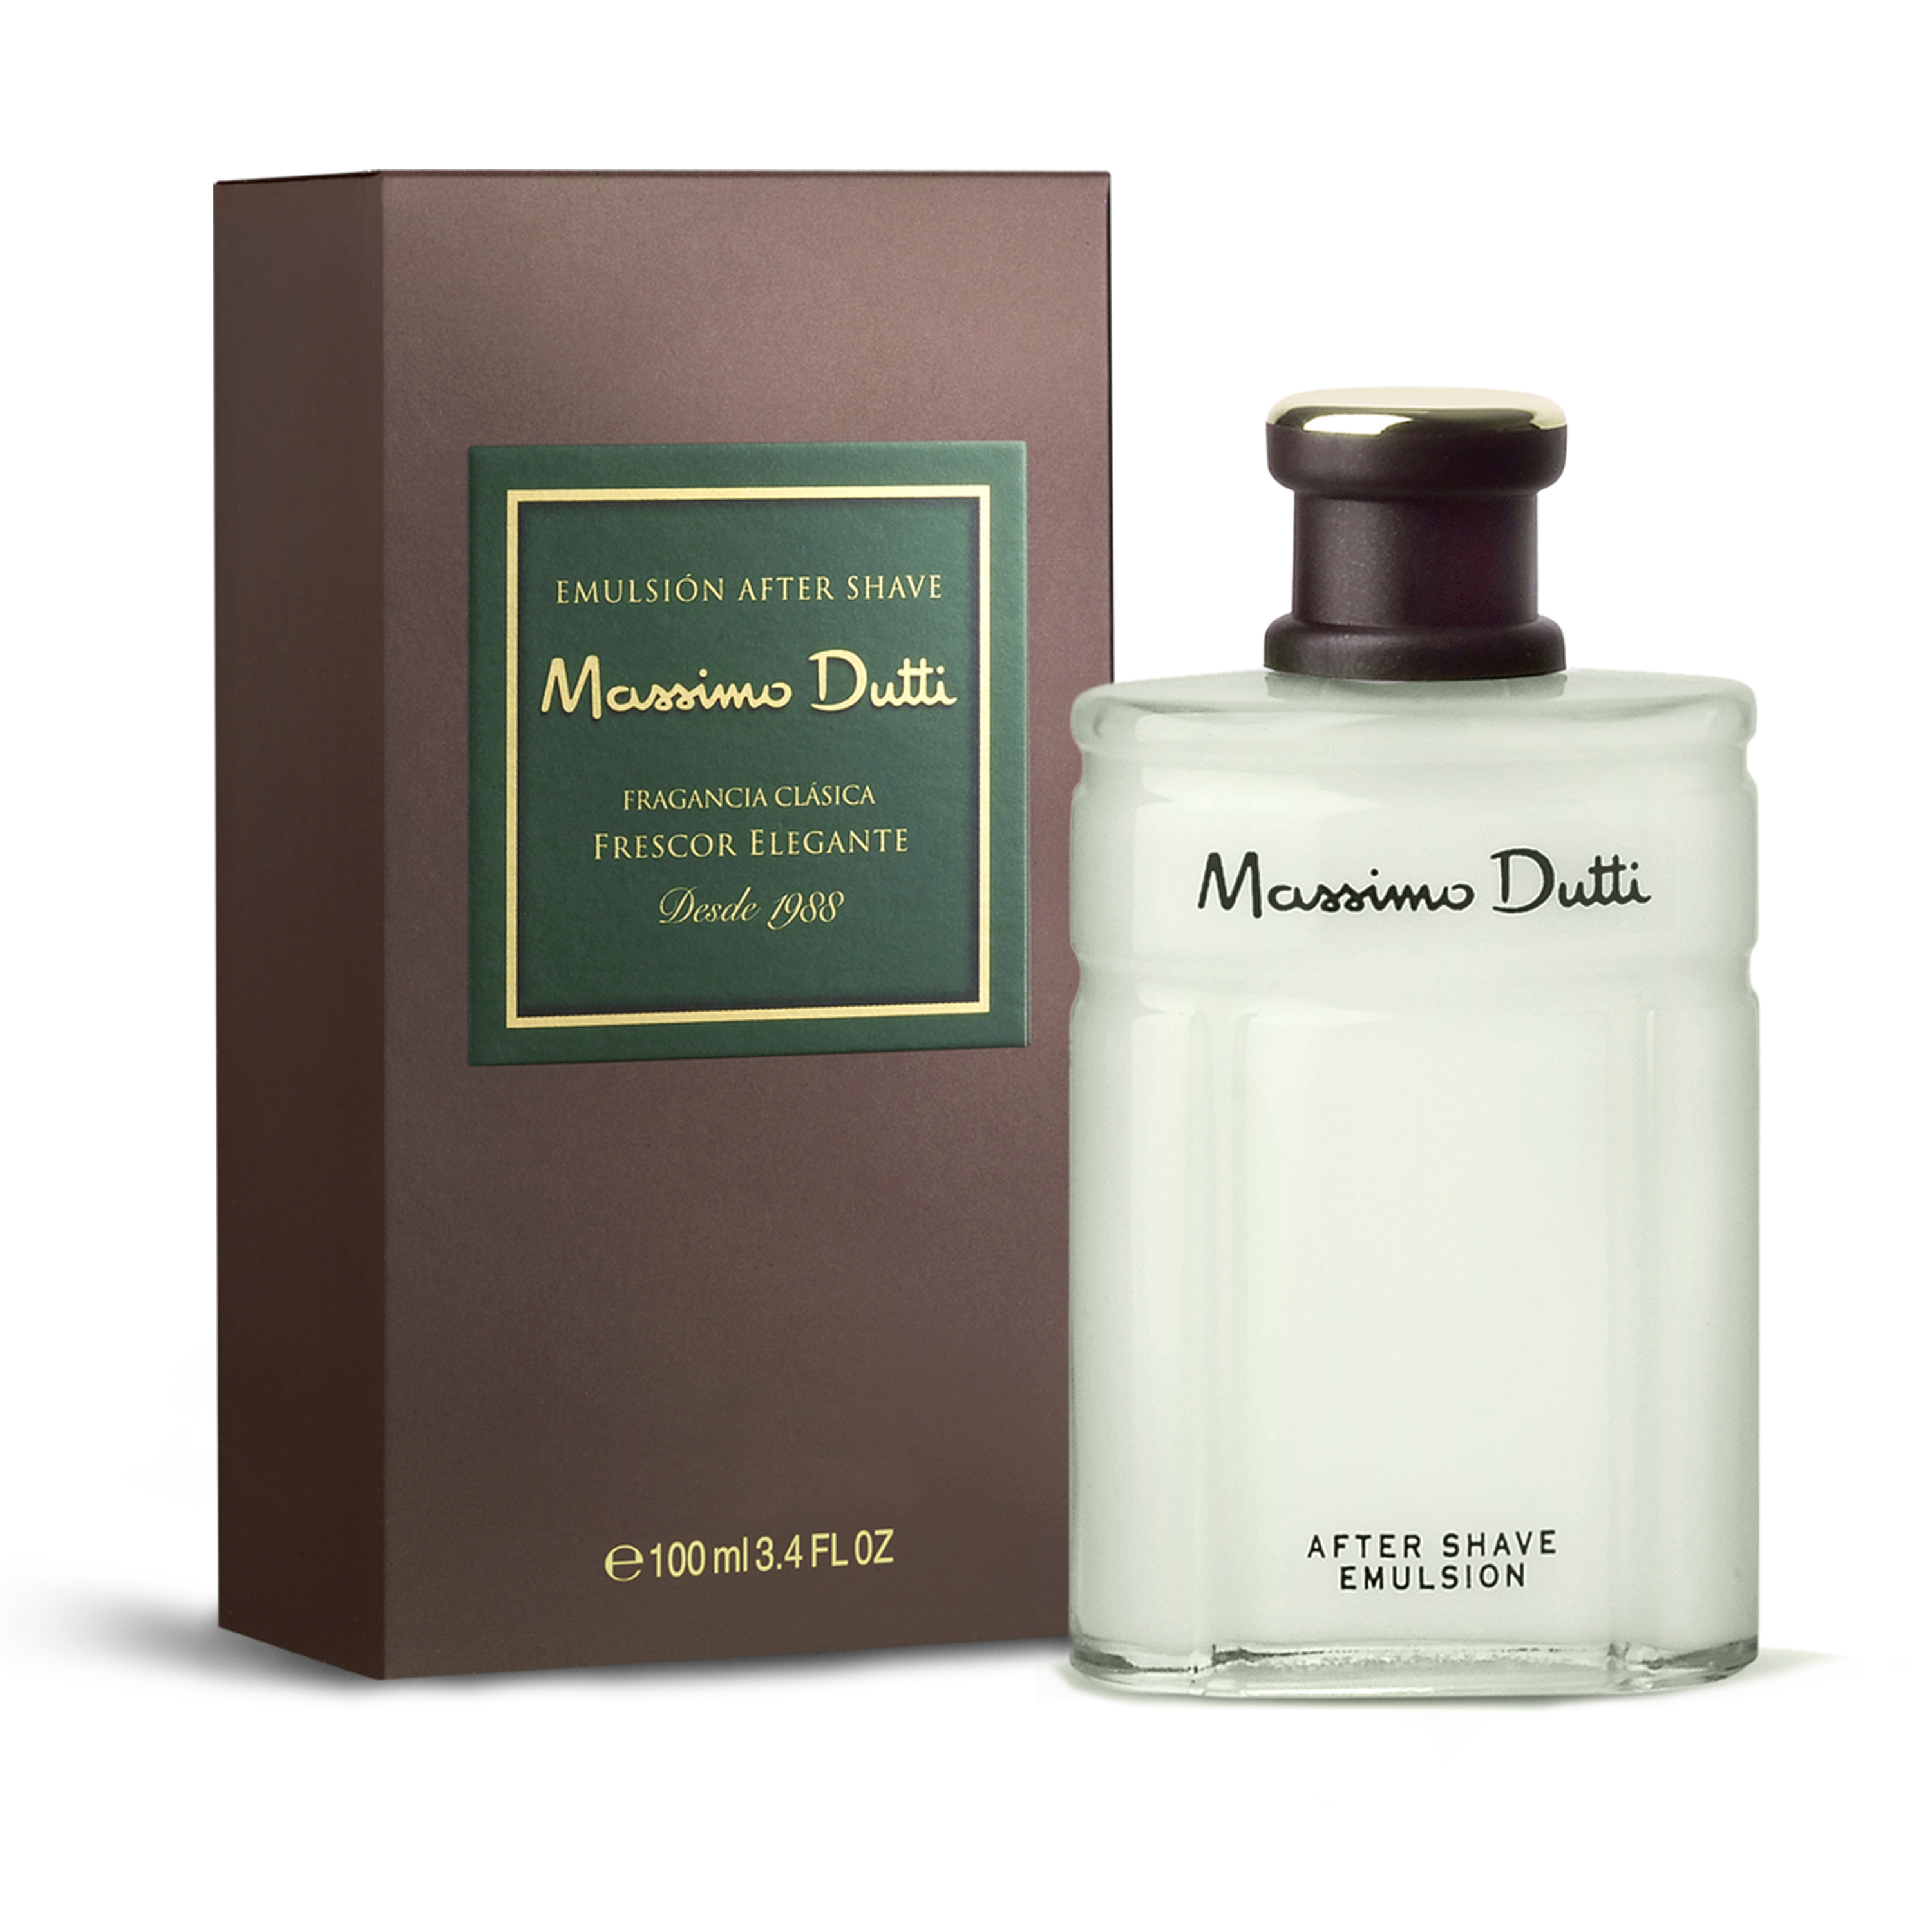 MASSIMO DUTI after shave emulsion 100 ml.